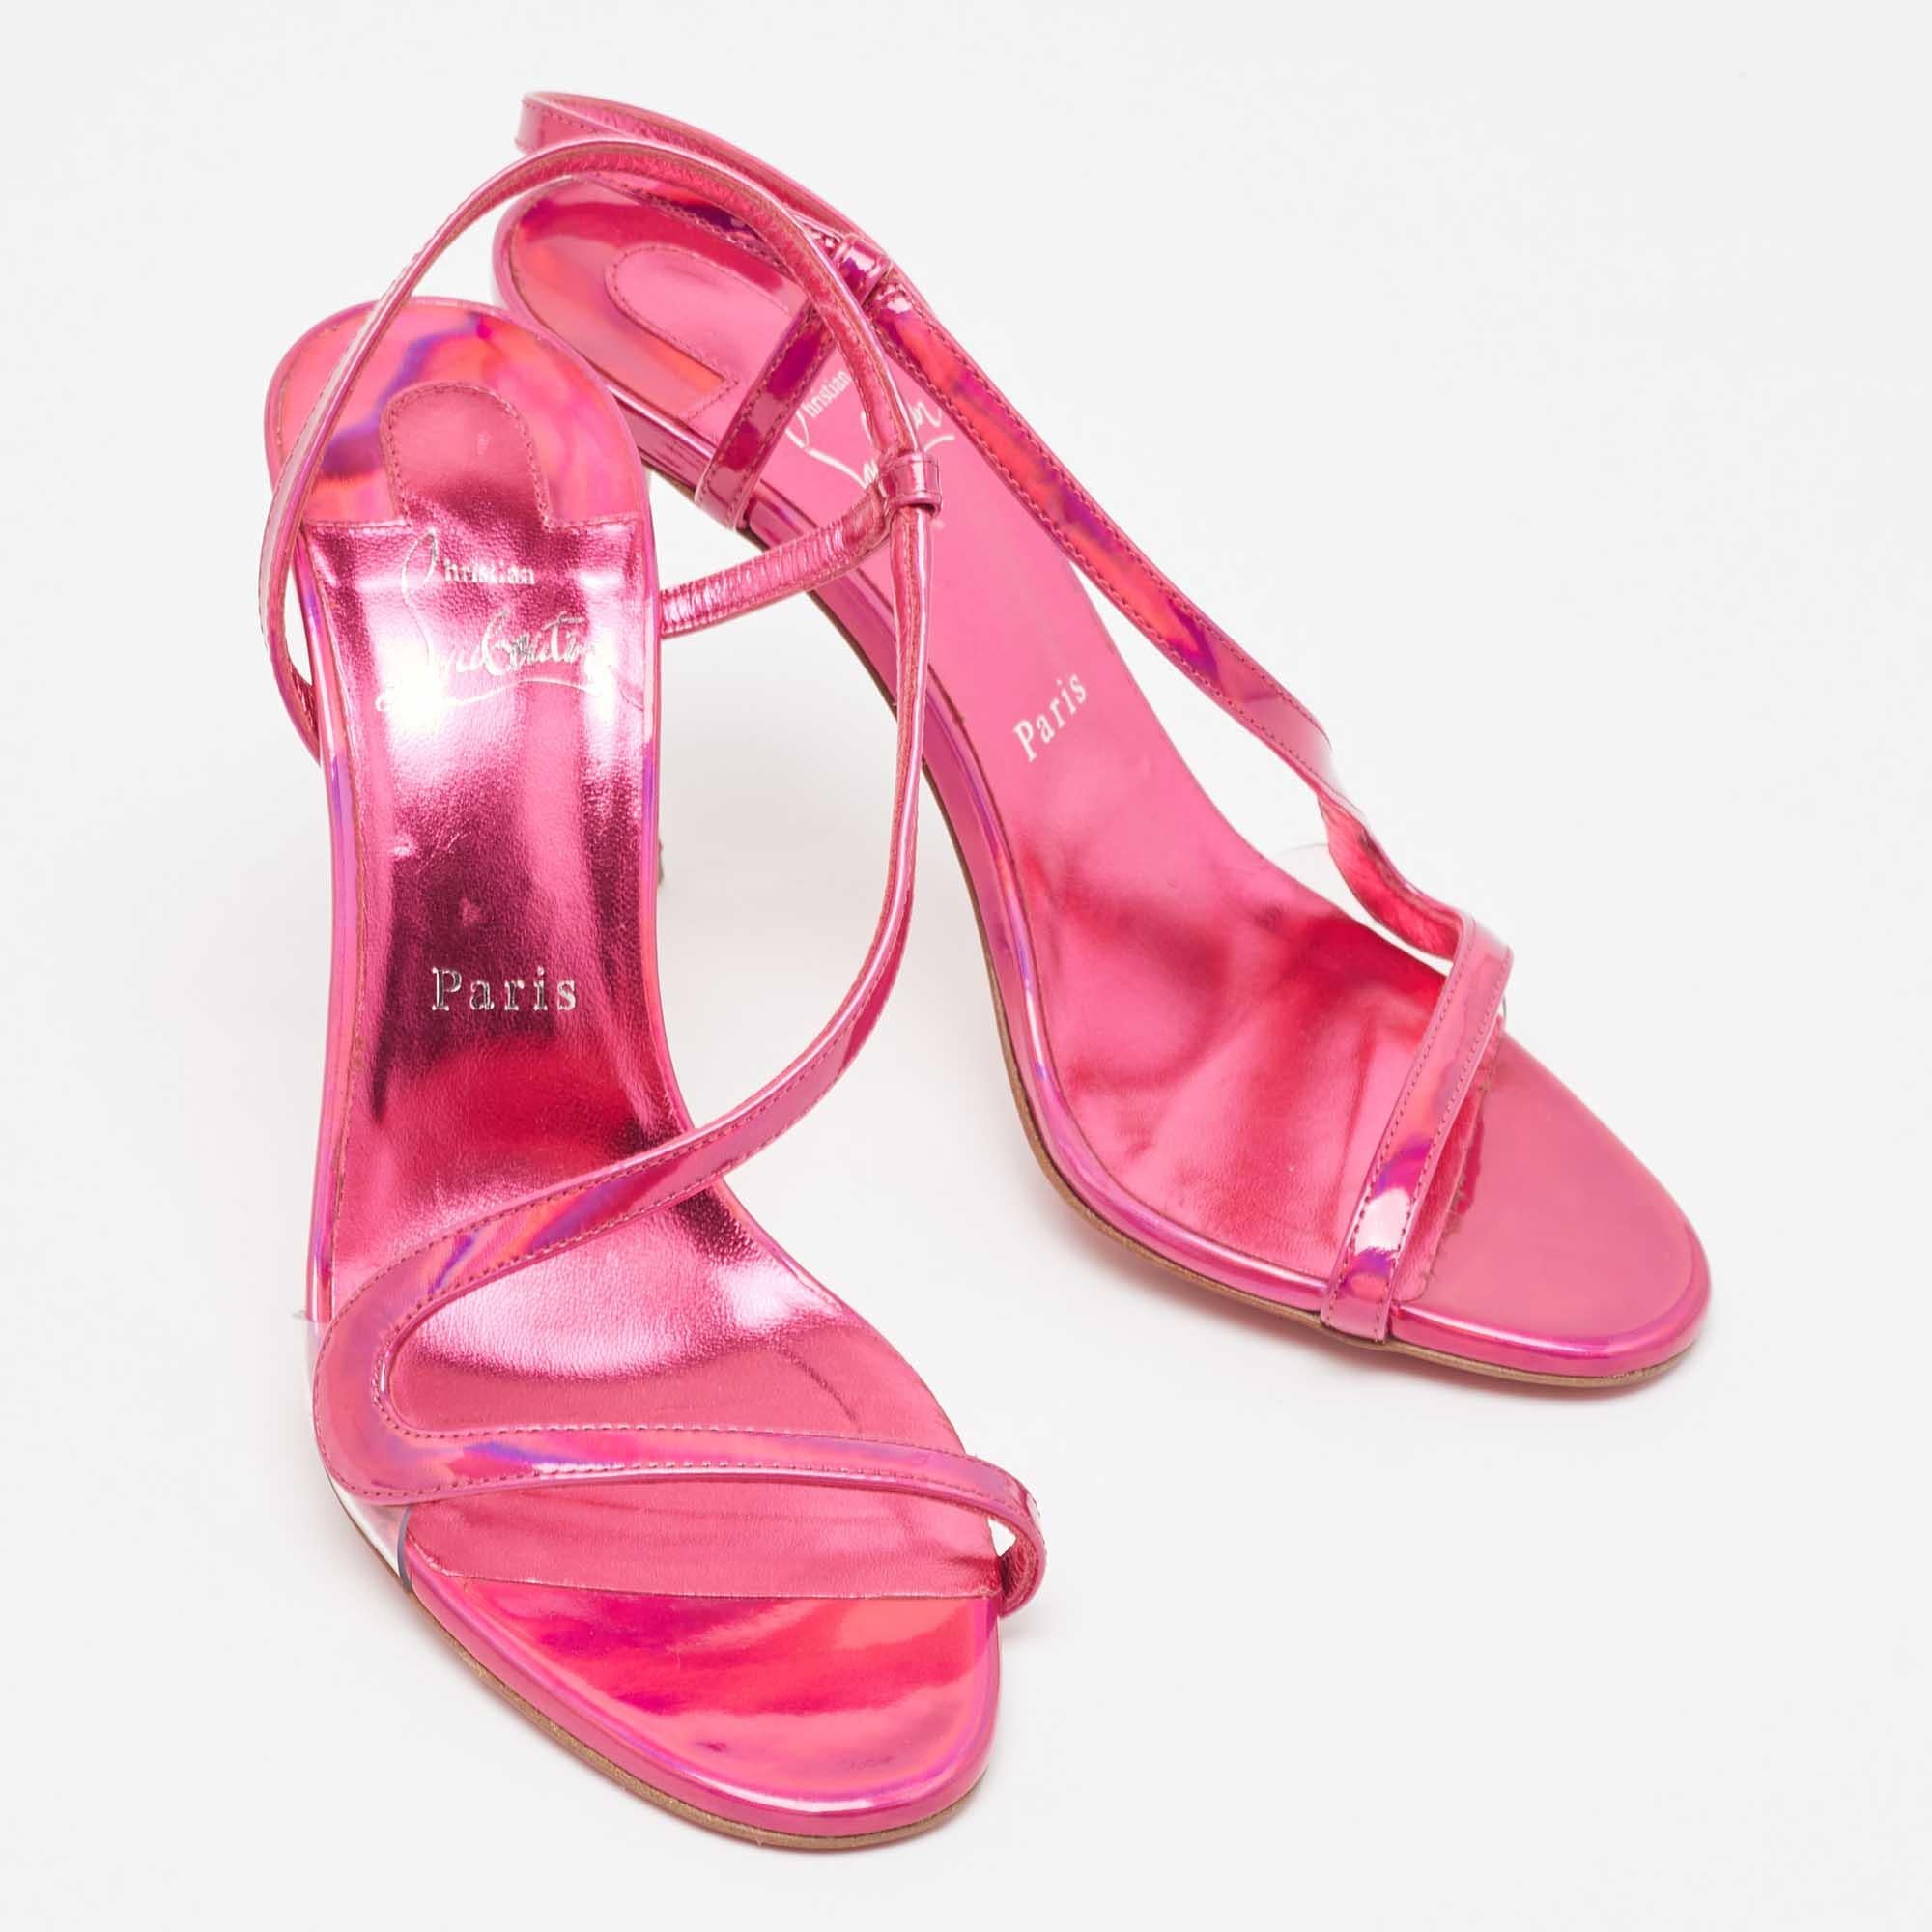 Christian Louboutin Pink Iridescent Leather Rosalie Sandals Size 38 5